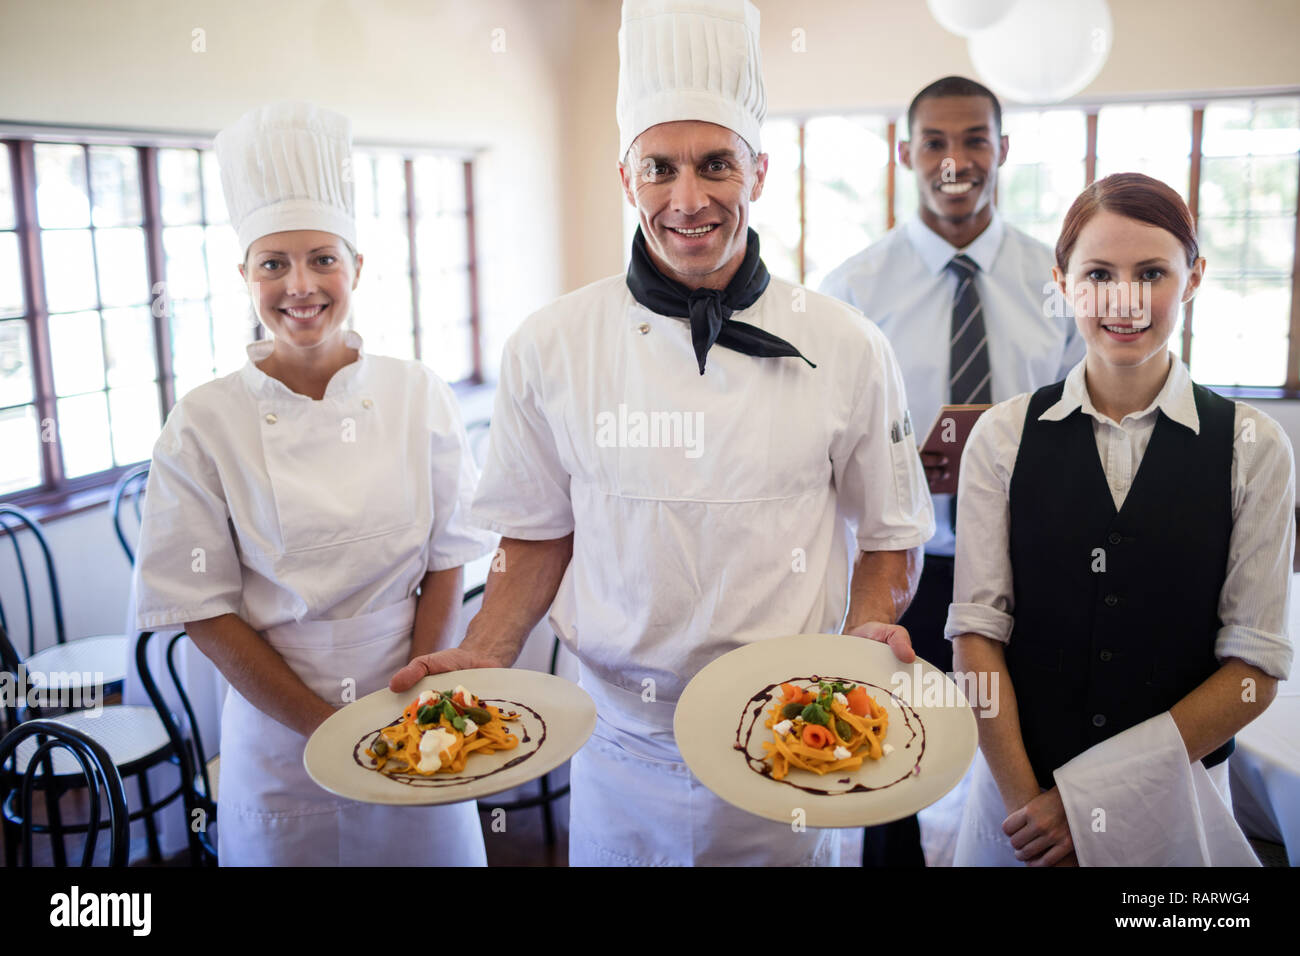 Male chefs holding plates with prepared food in hotel Stock Photo